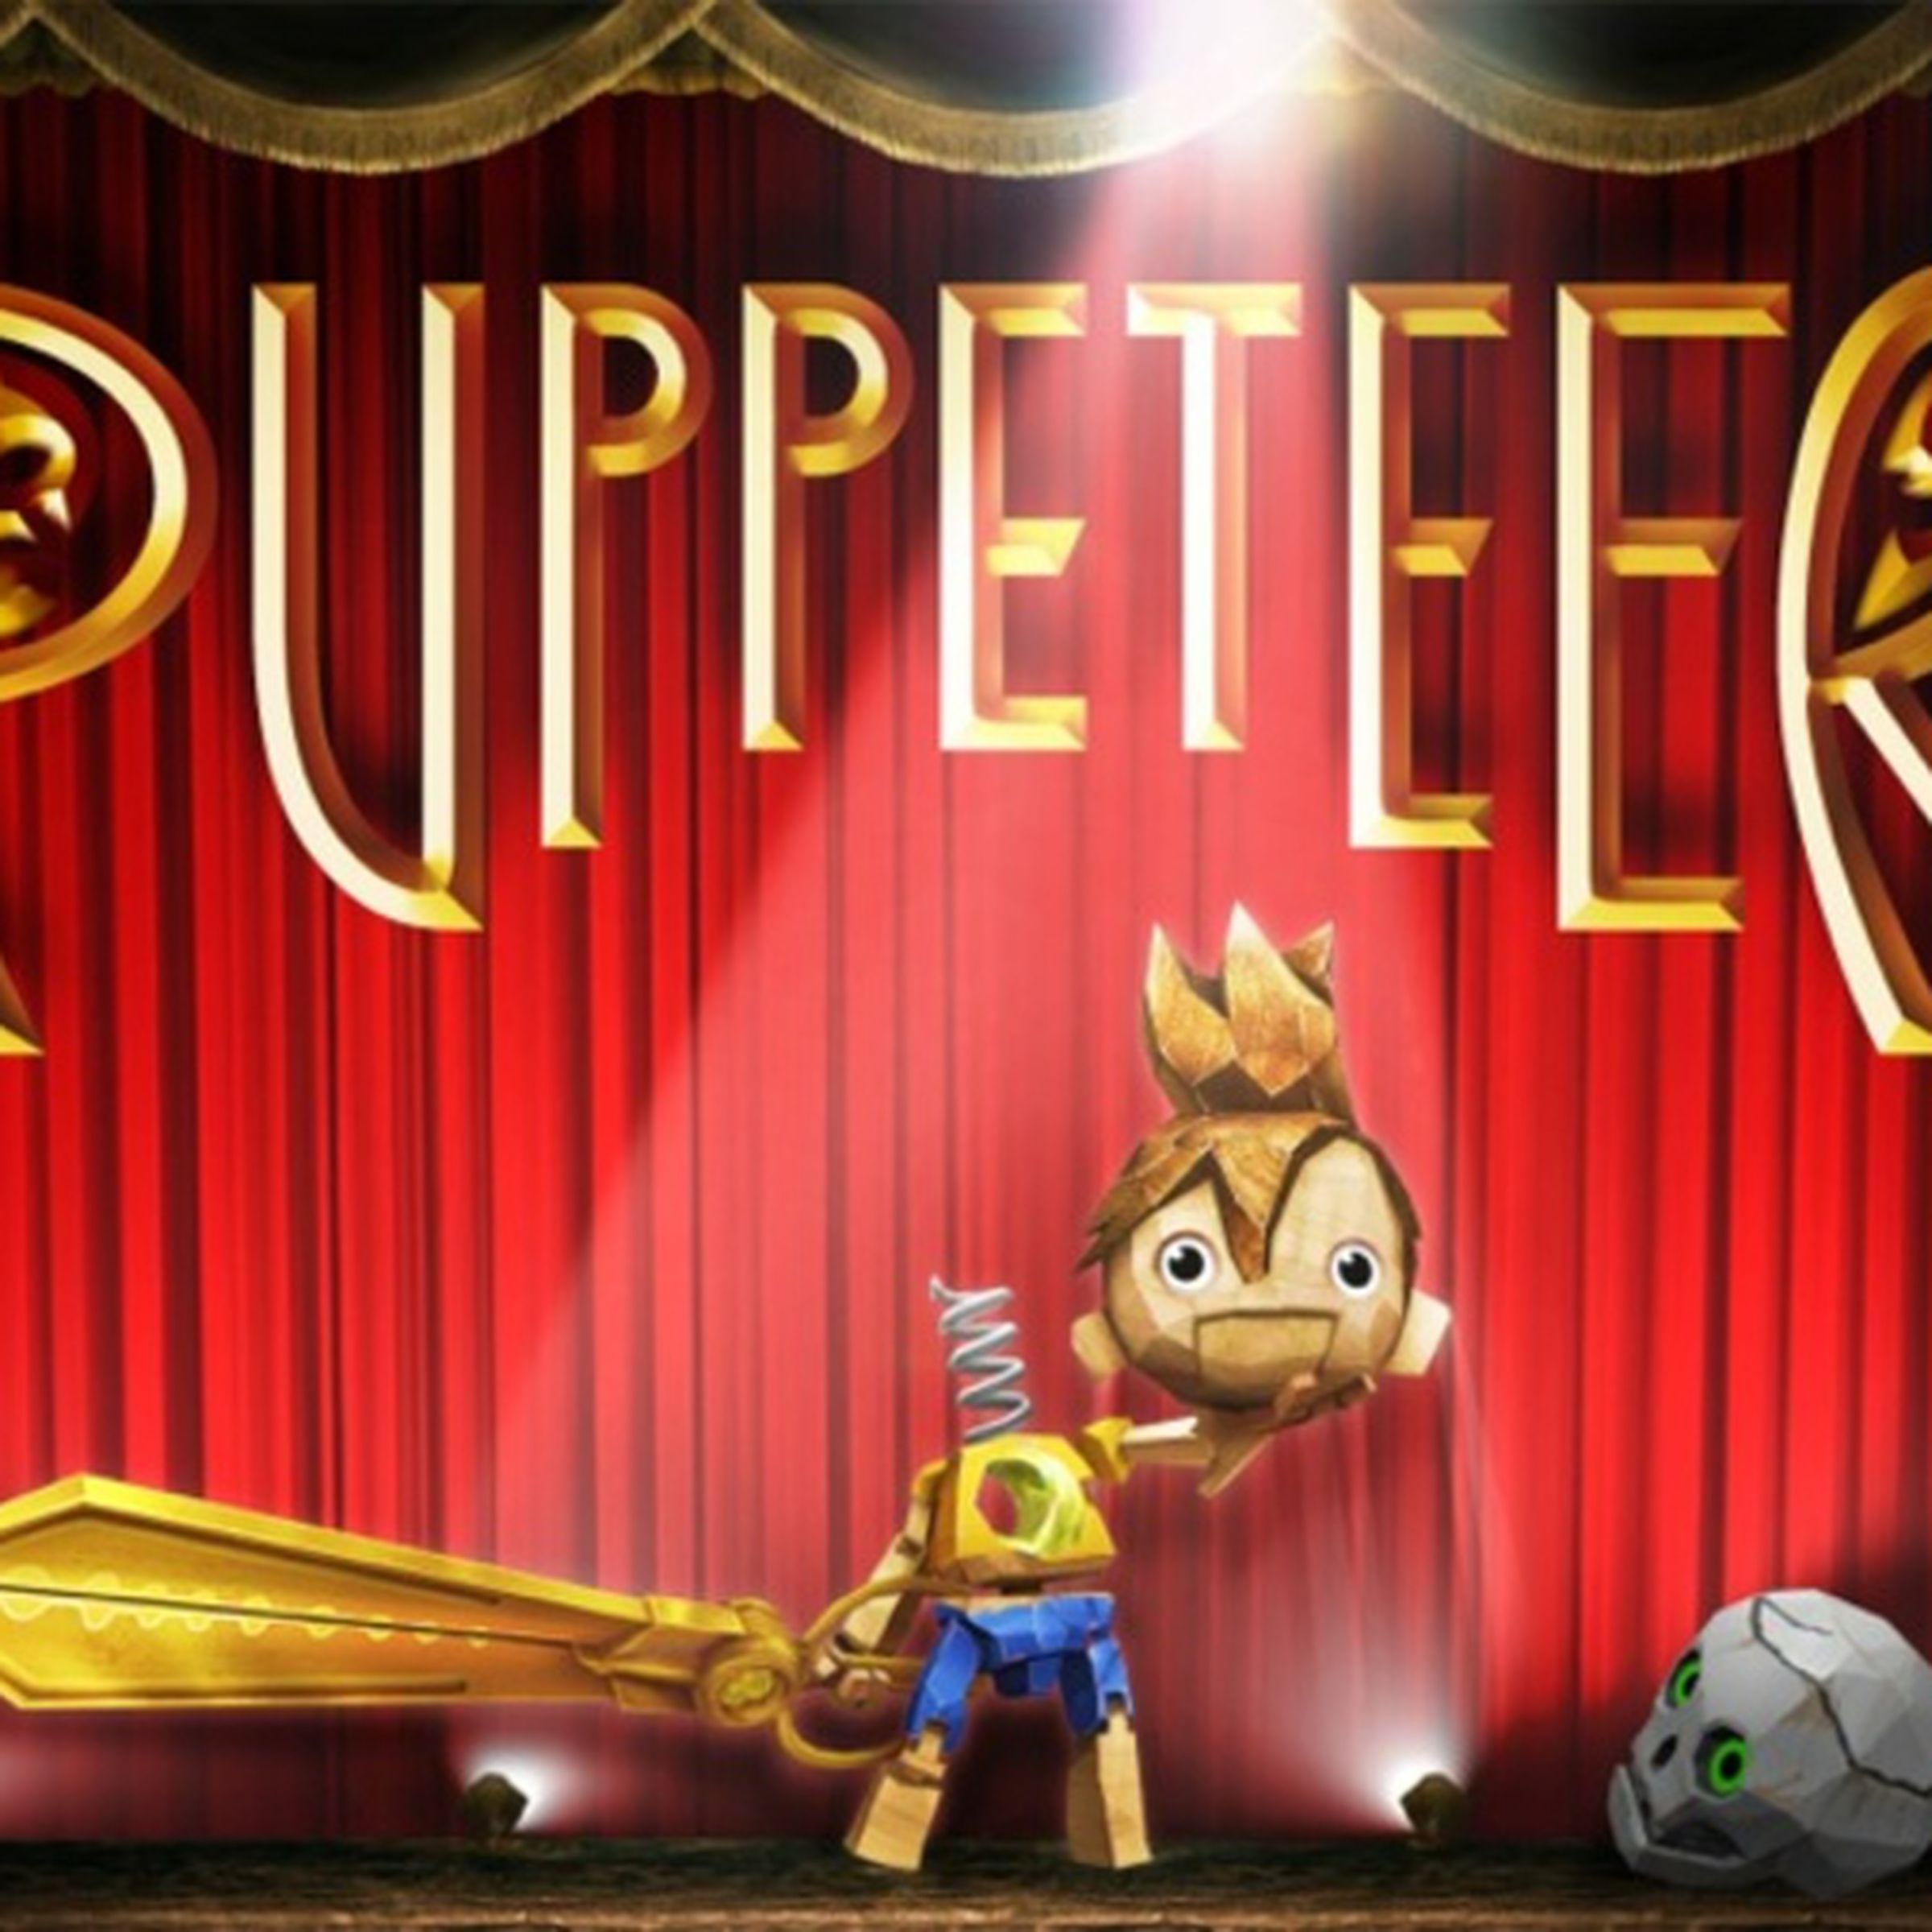 puppeteer